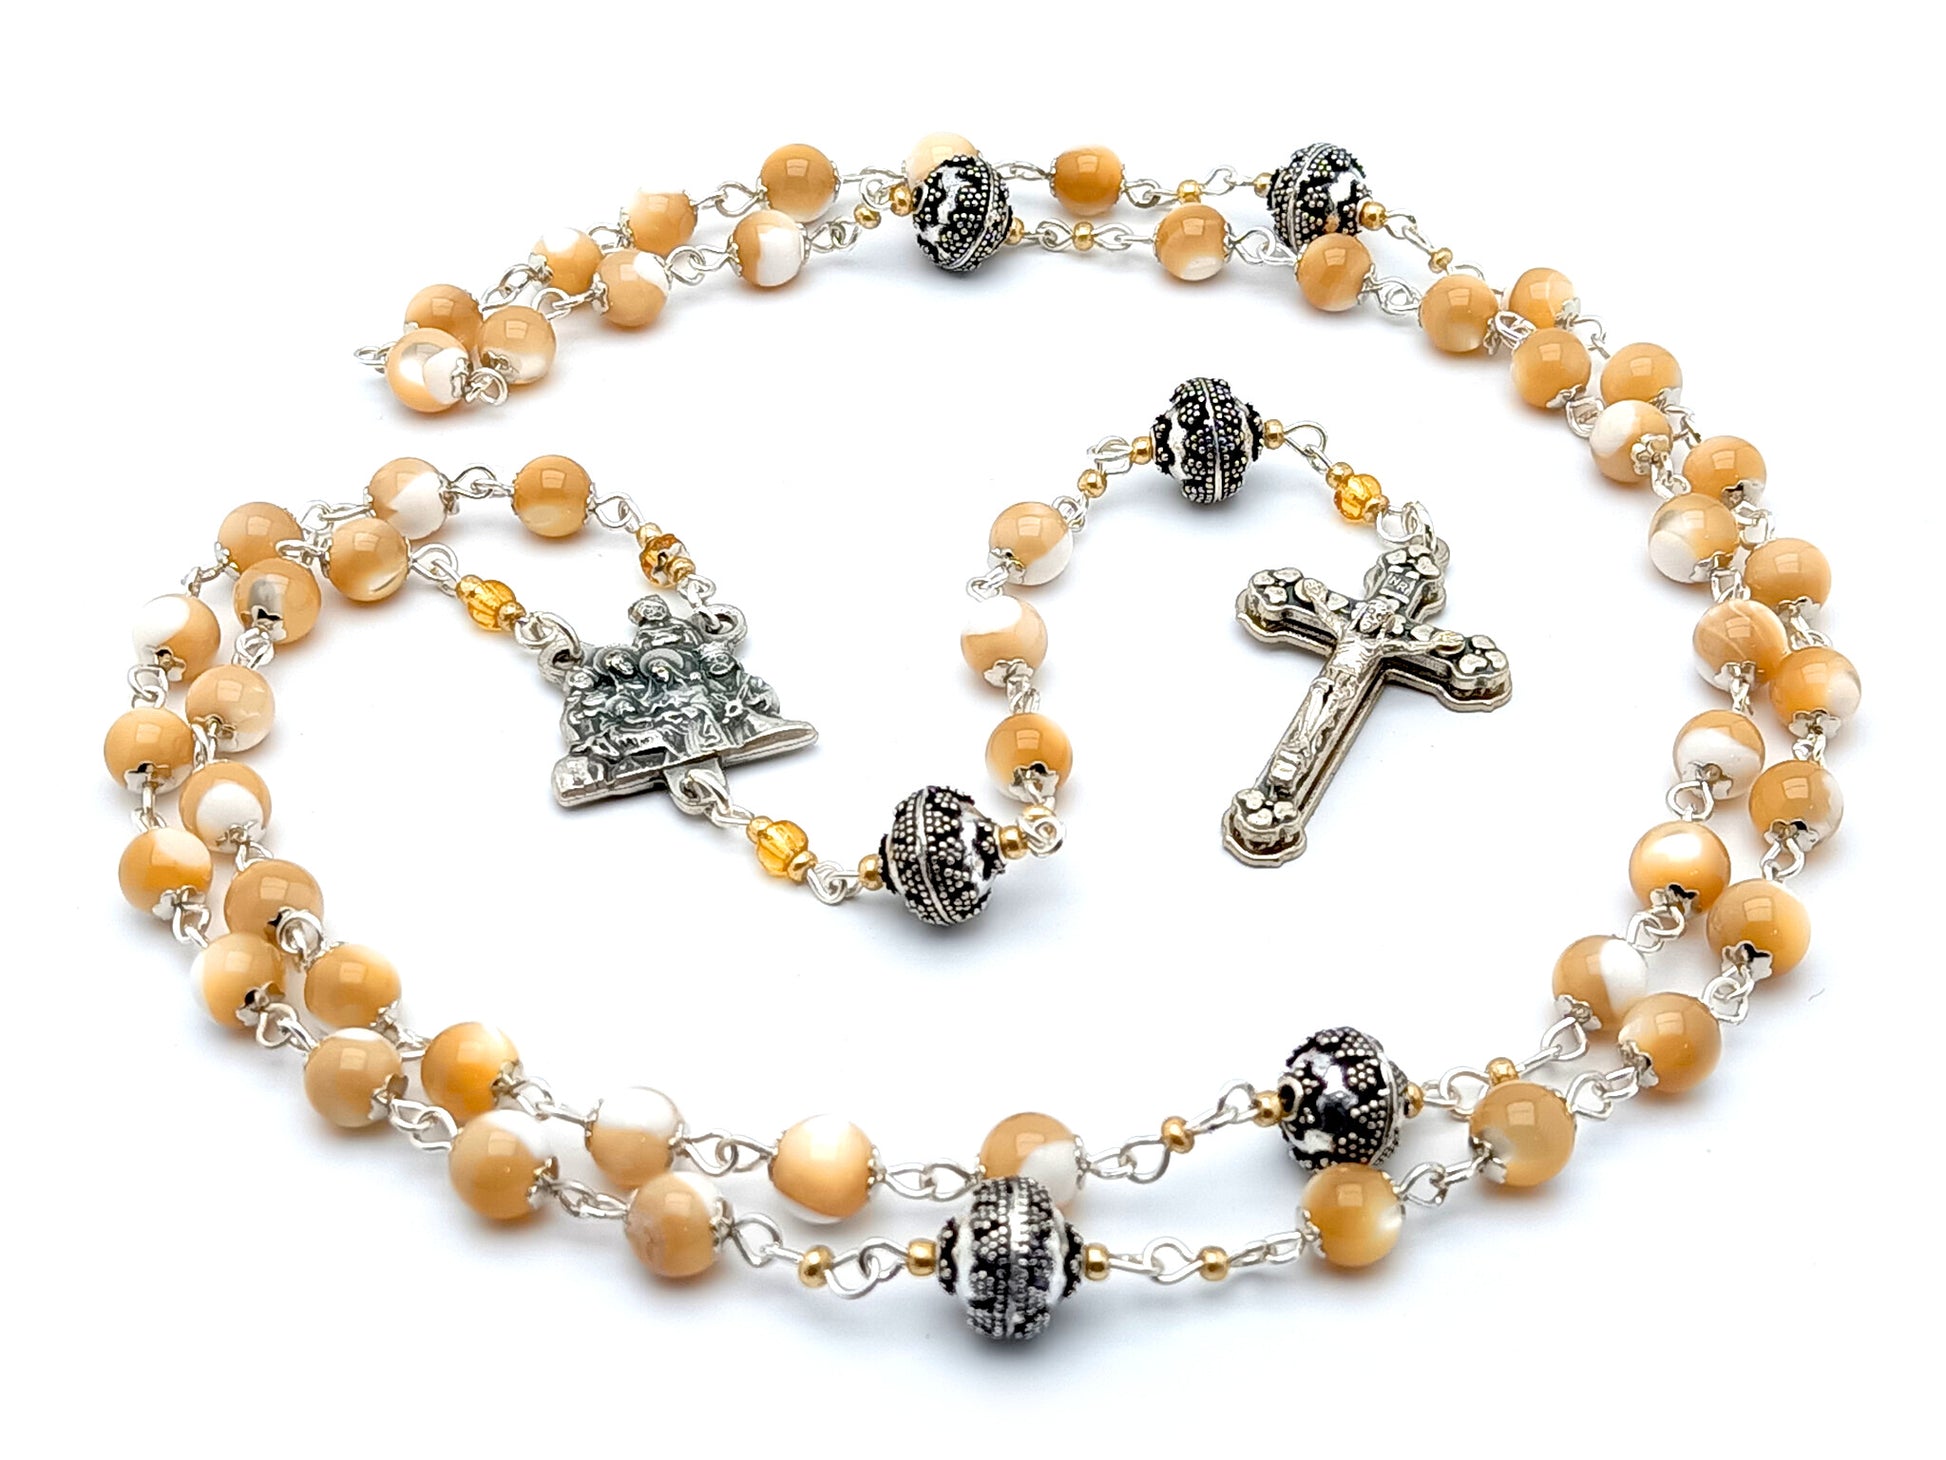 The Nativity unique rosary beads with mother of pearl and silver beads, silver crucifix and centre medal.